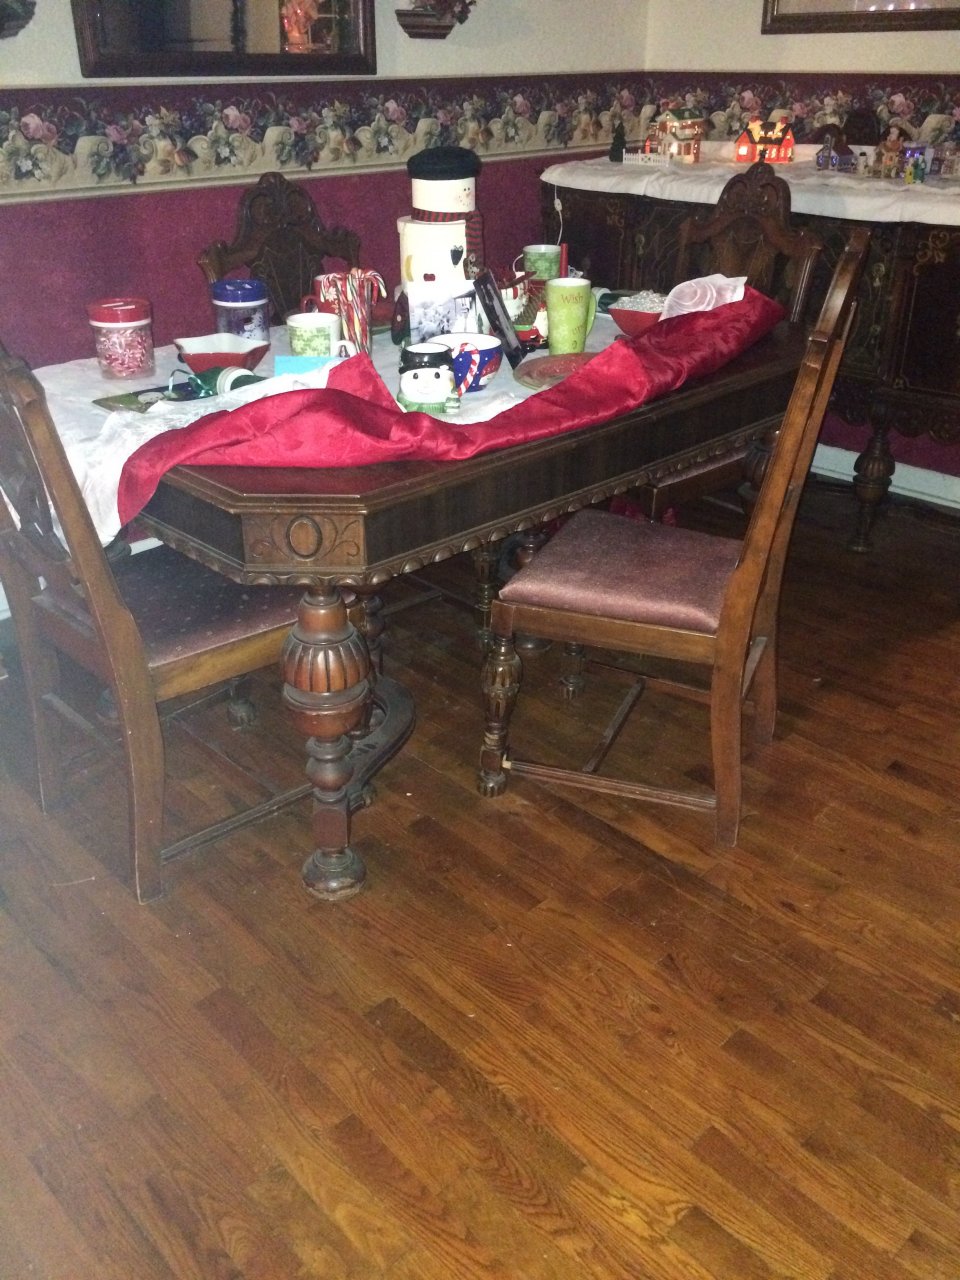 Bassett (?) Dining Room Set | My Antique Furniture Collection